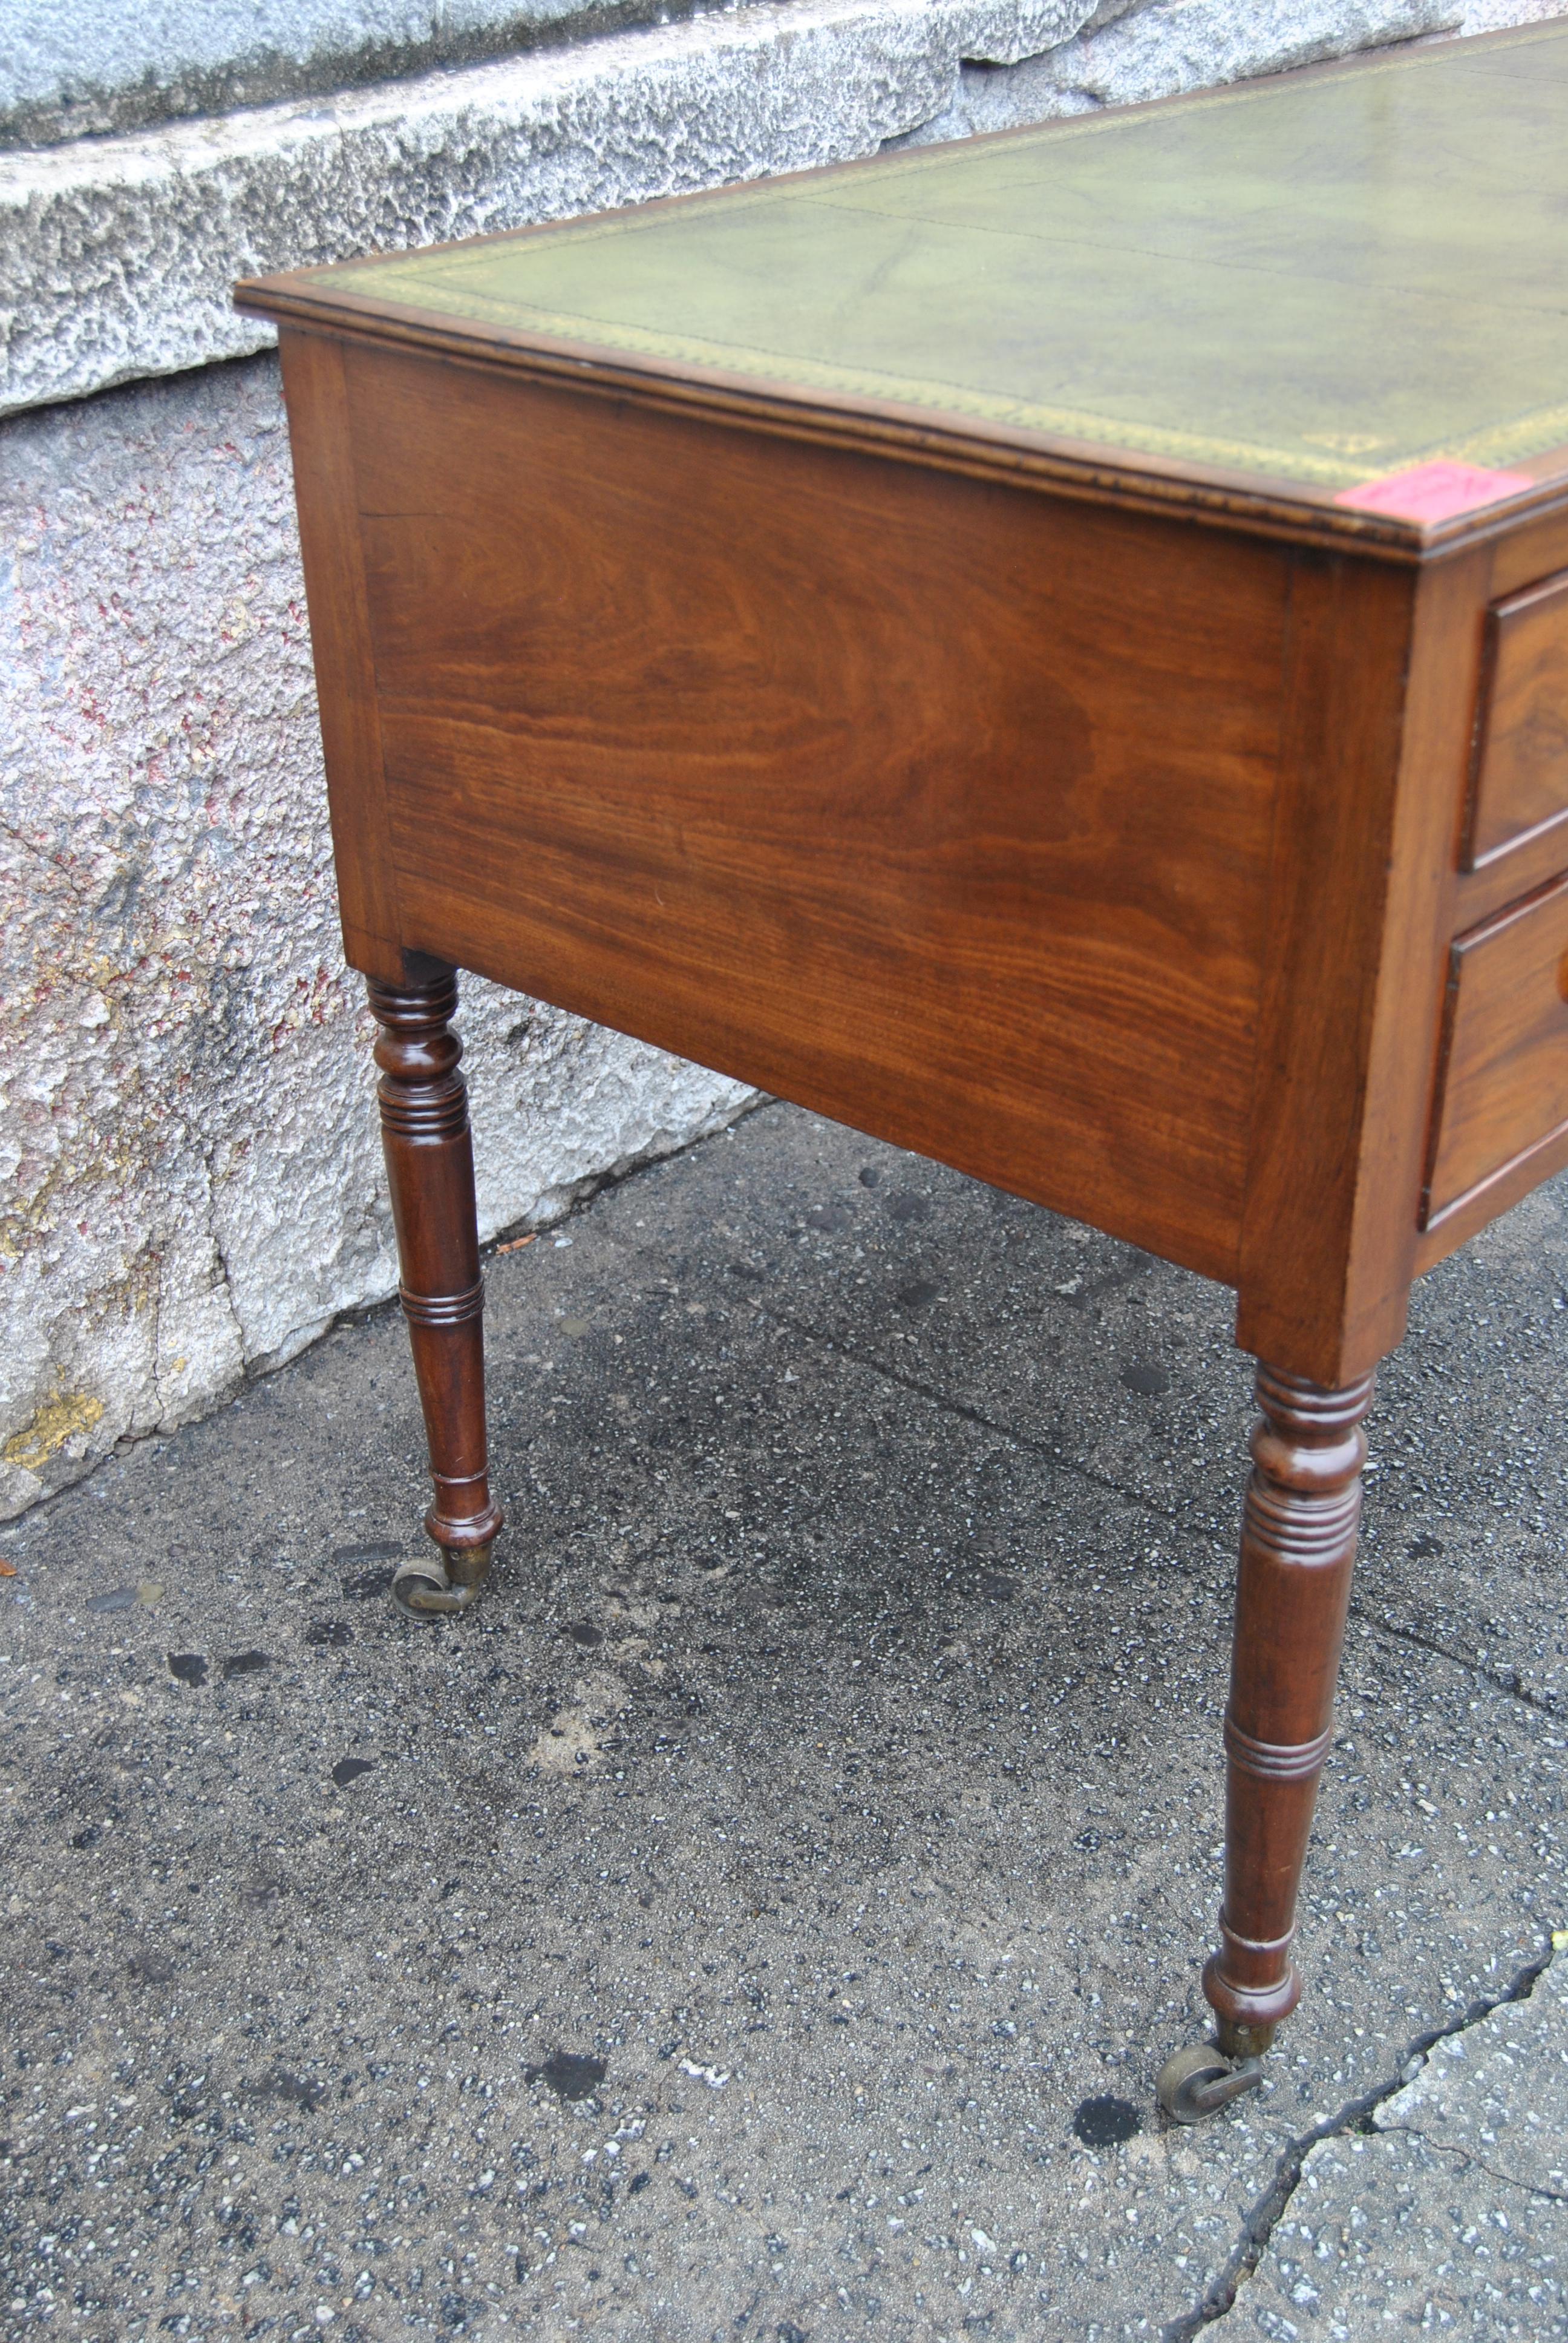 This is a mahogany writing table / desk made in England, circa 1870. The top of the desk has a very nice green leather writing surface with gold gilt tooling. The front edge and the right and left edges of the top are reeded. There are 2 drawers on